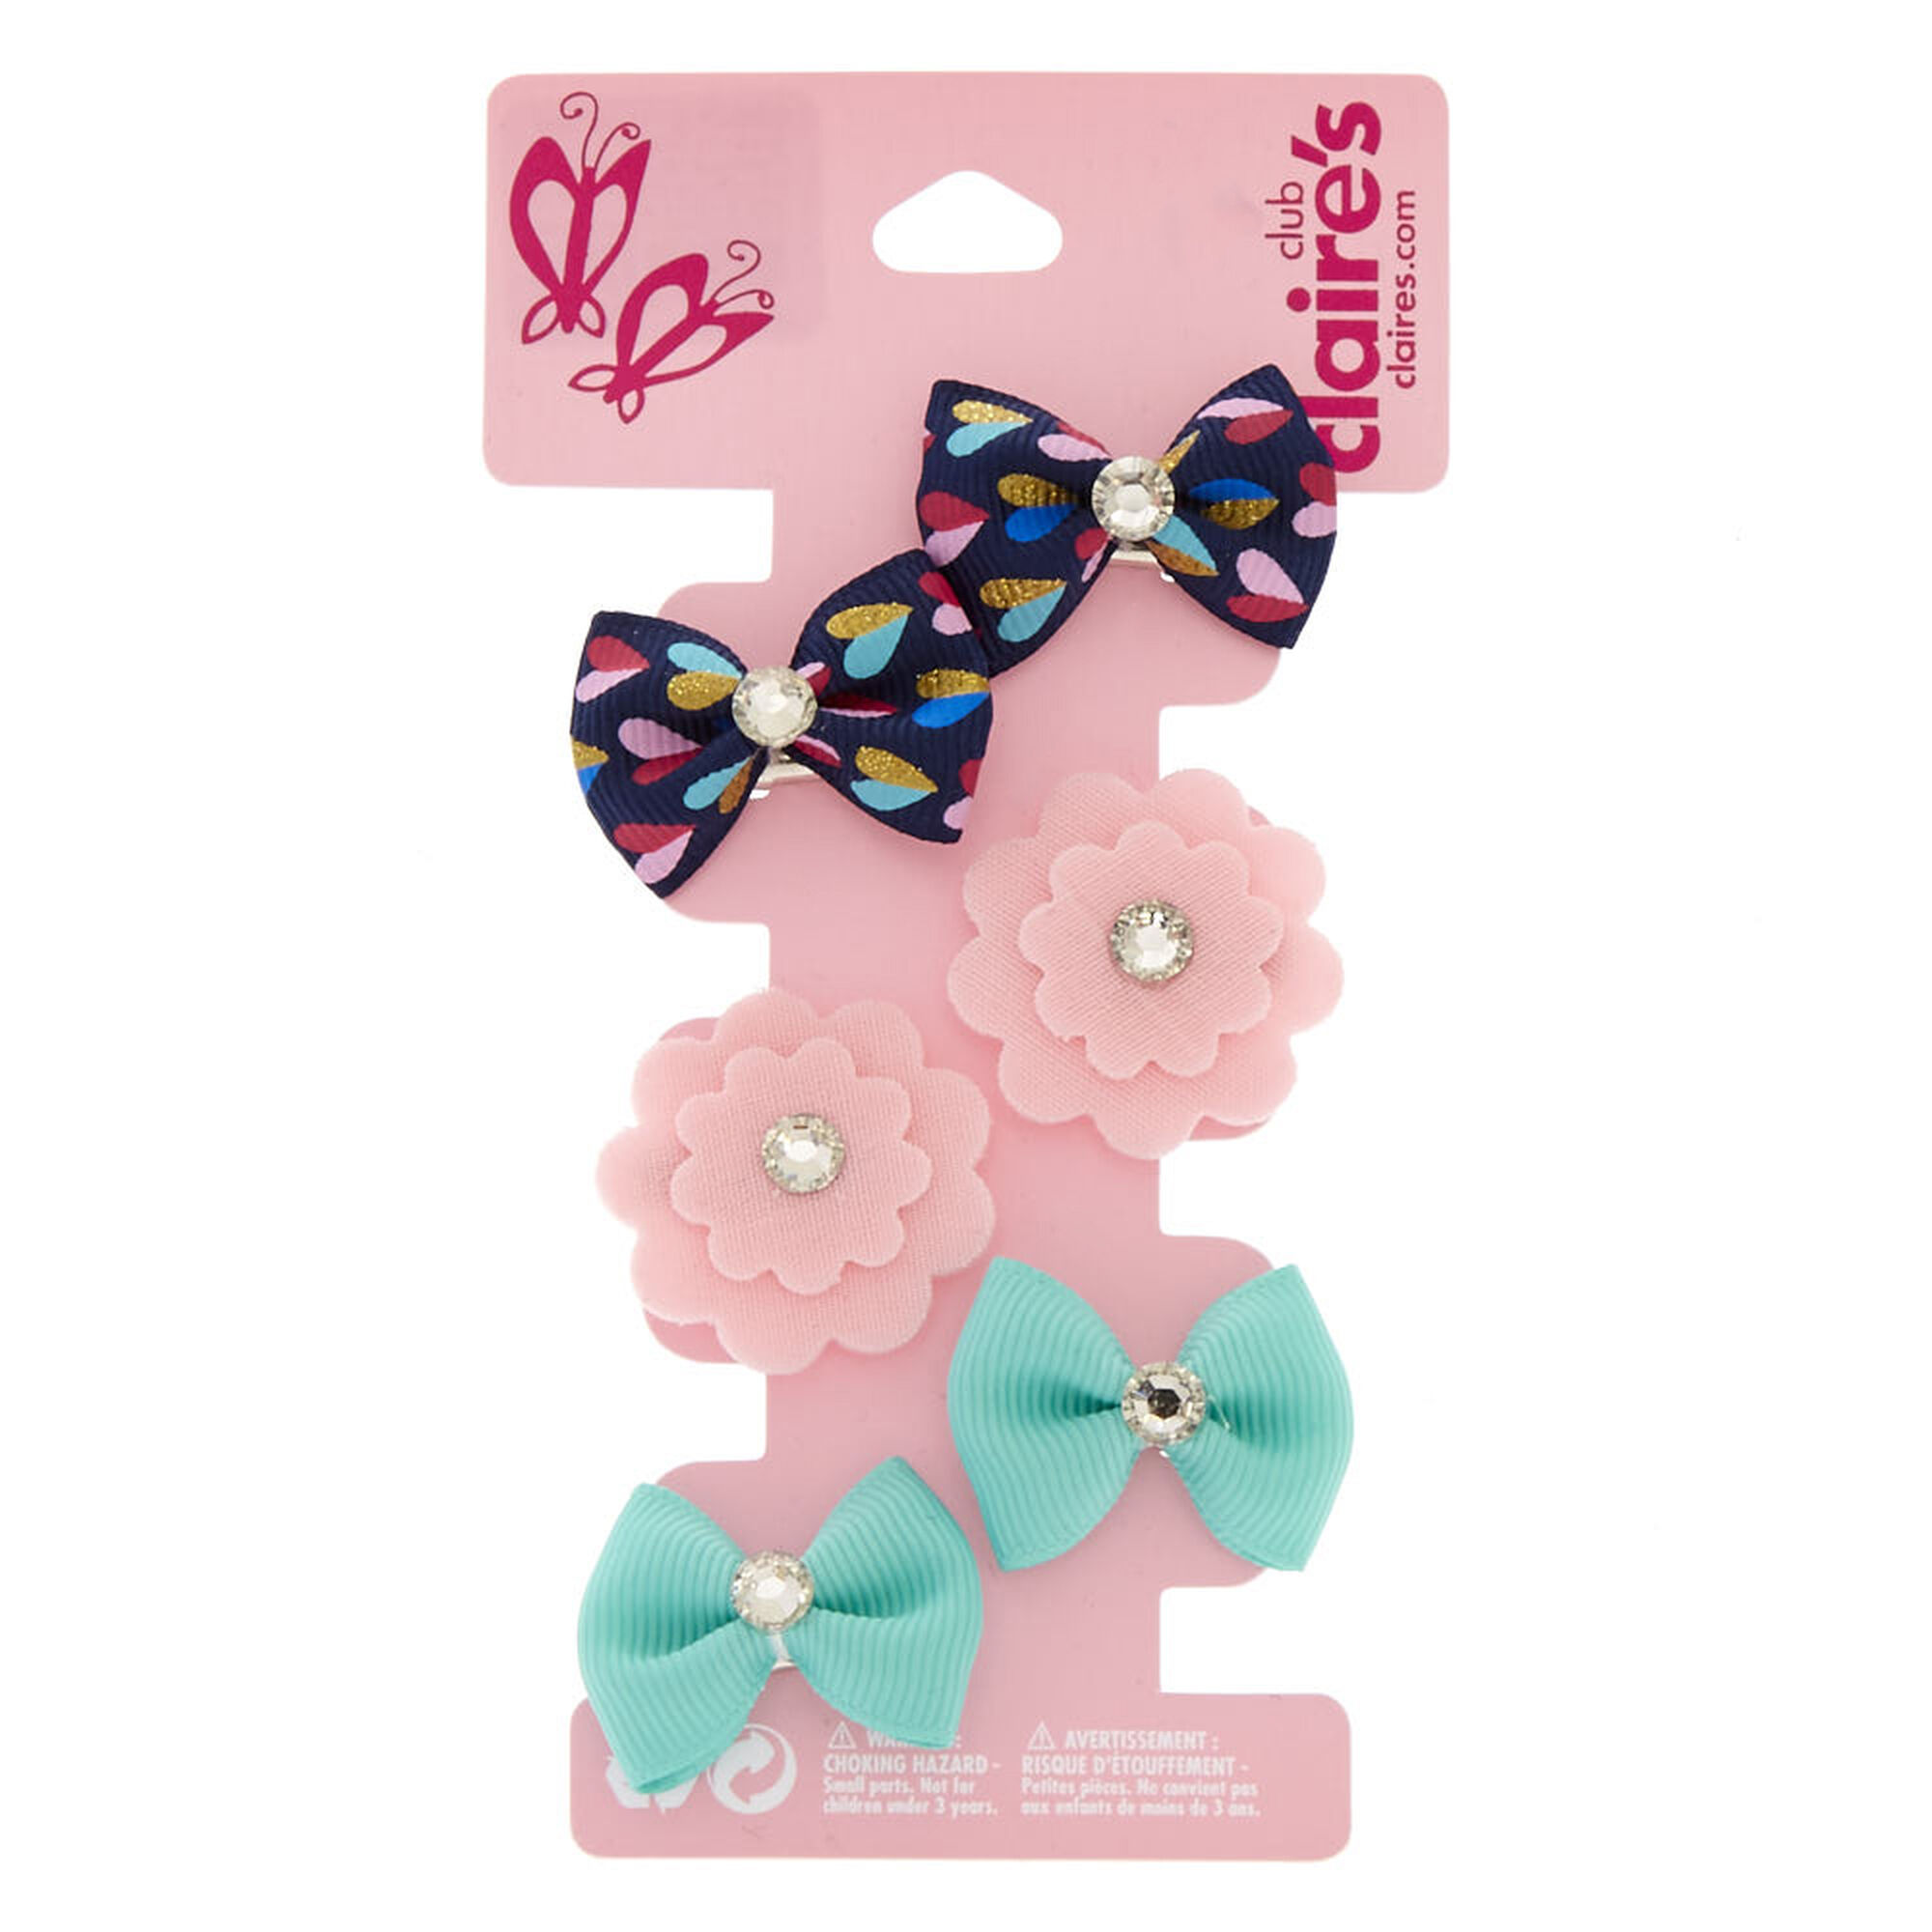  Claire's Club Glitter Bow Hair Clips for Girls Age 3-6,  Toddler Children's Little Girl Hair Accessories Crocodile Clip Barrettes  Pink Gold and White Hair Bows (3 Pack) : Beauty & Personal Care